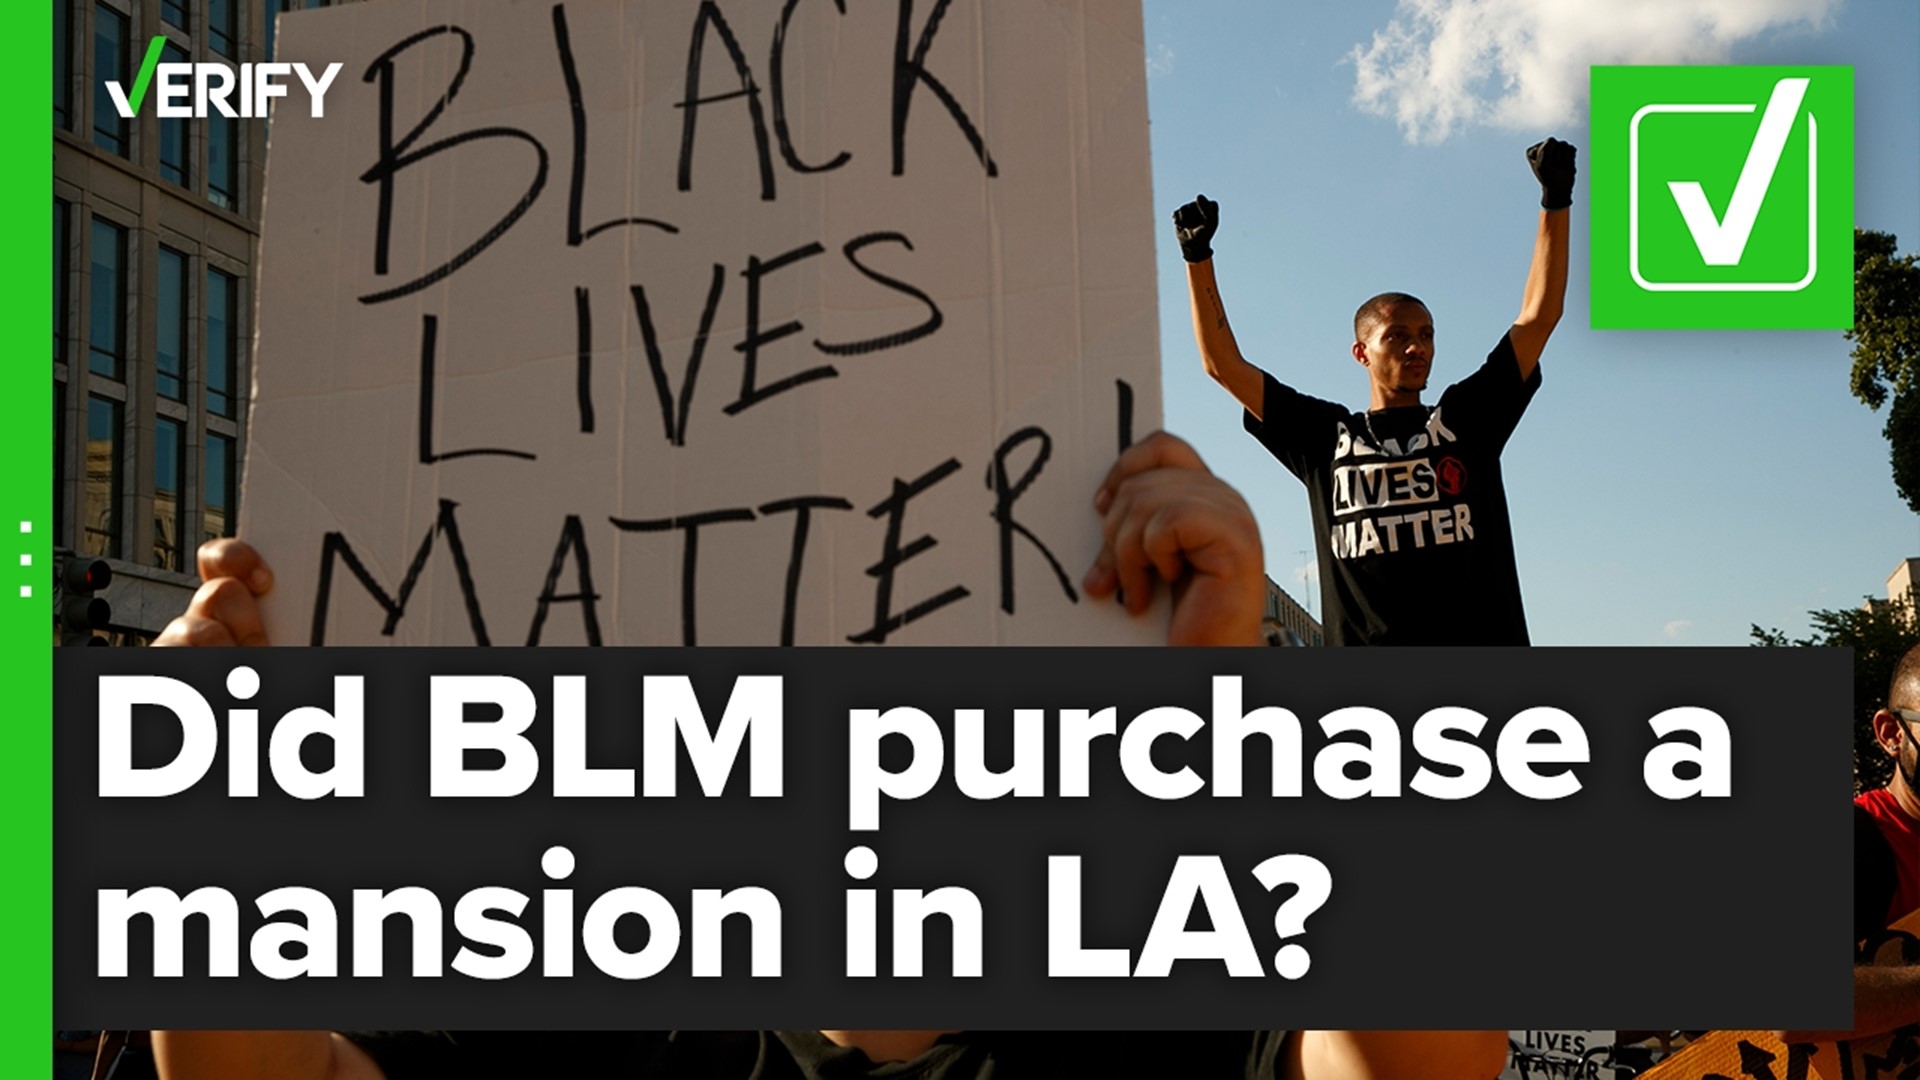 Did Black Lives Matter’s national nonprofit purchased a multimillion-dollar house in Los Angeles in 2020?  The VERIFY team confirms this is true.